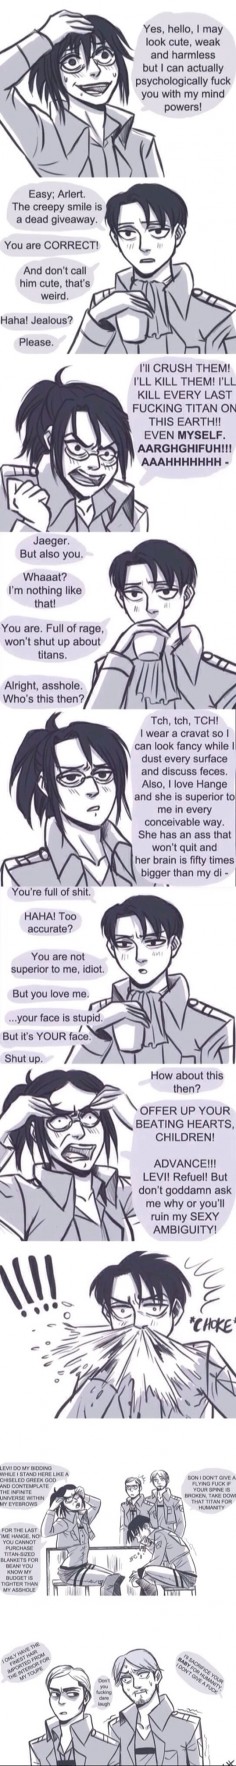 Attack on Titan: Hange doing impressions of Armin, Eren, Levi and Erwin. This board = hilarious